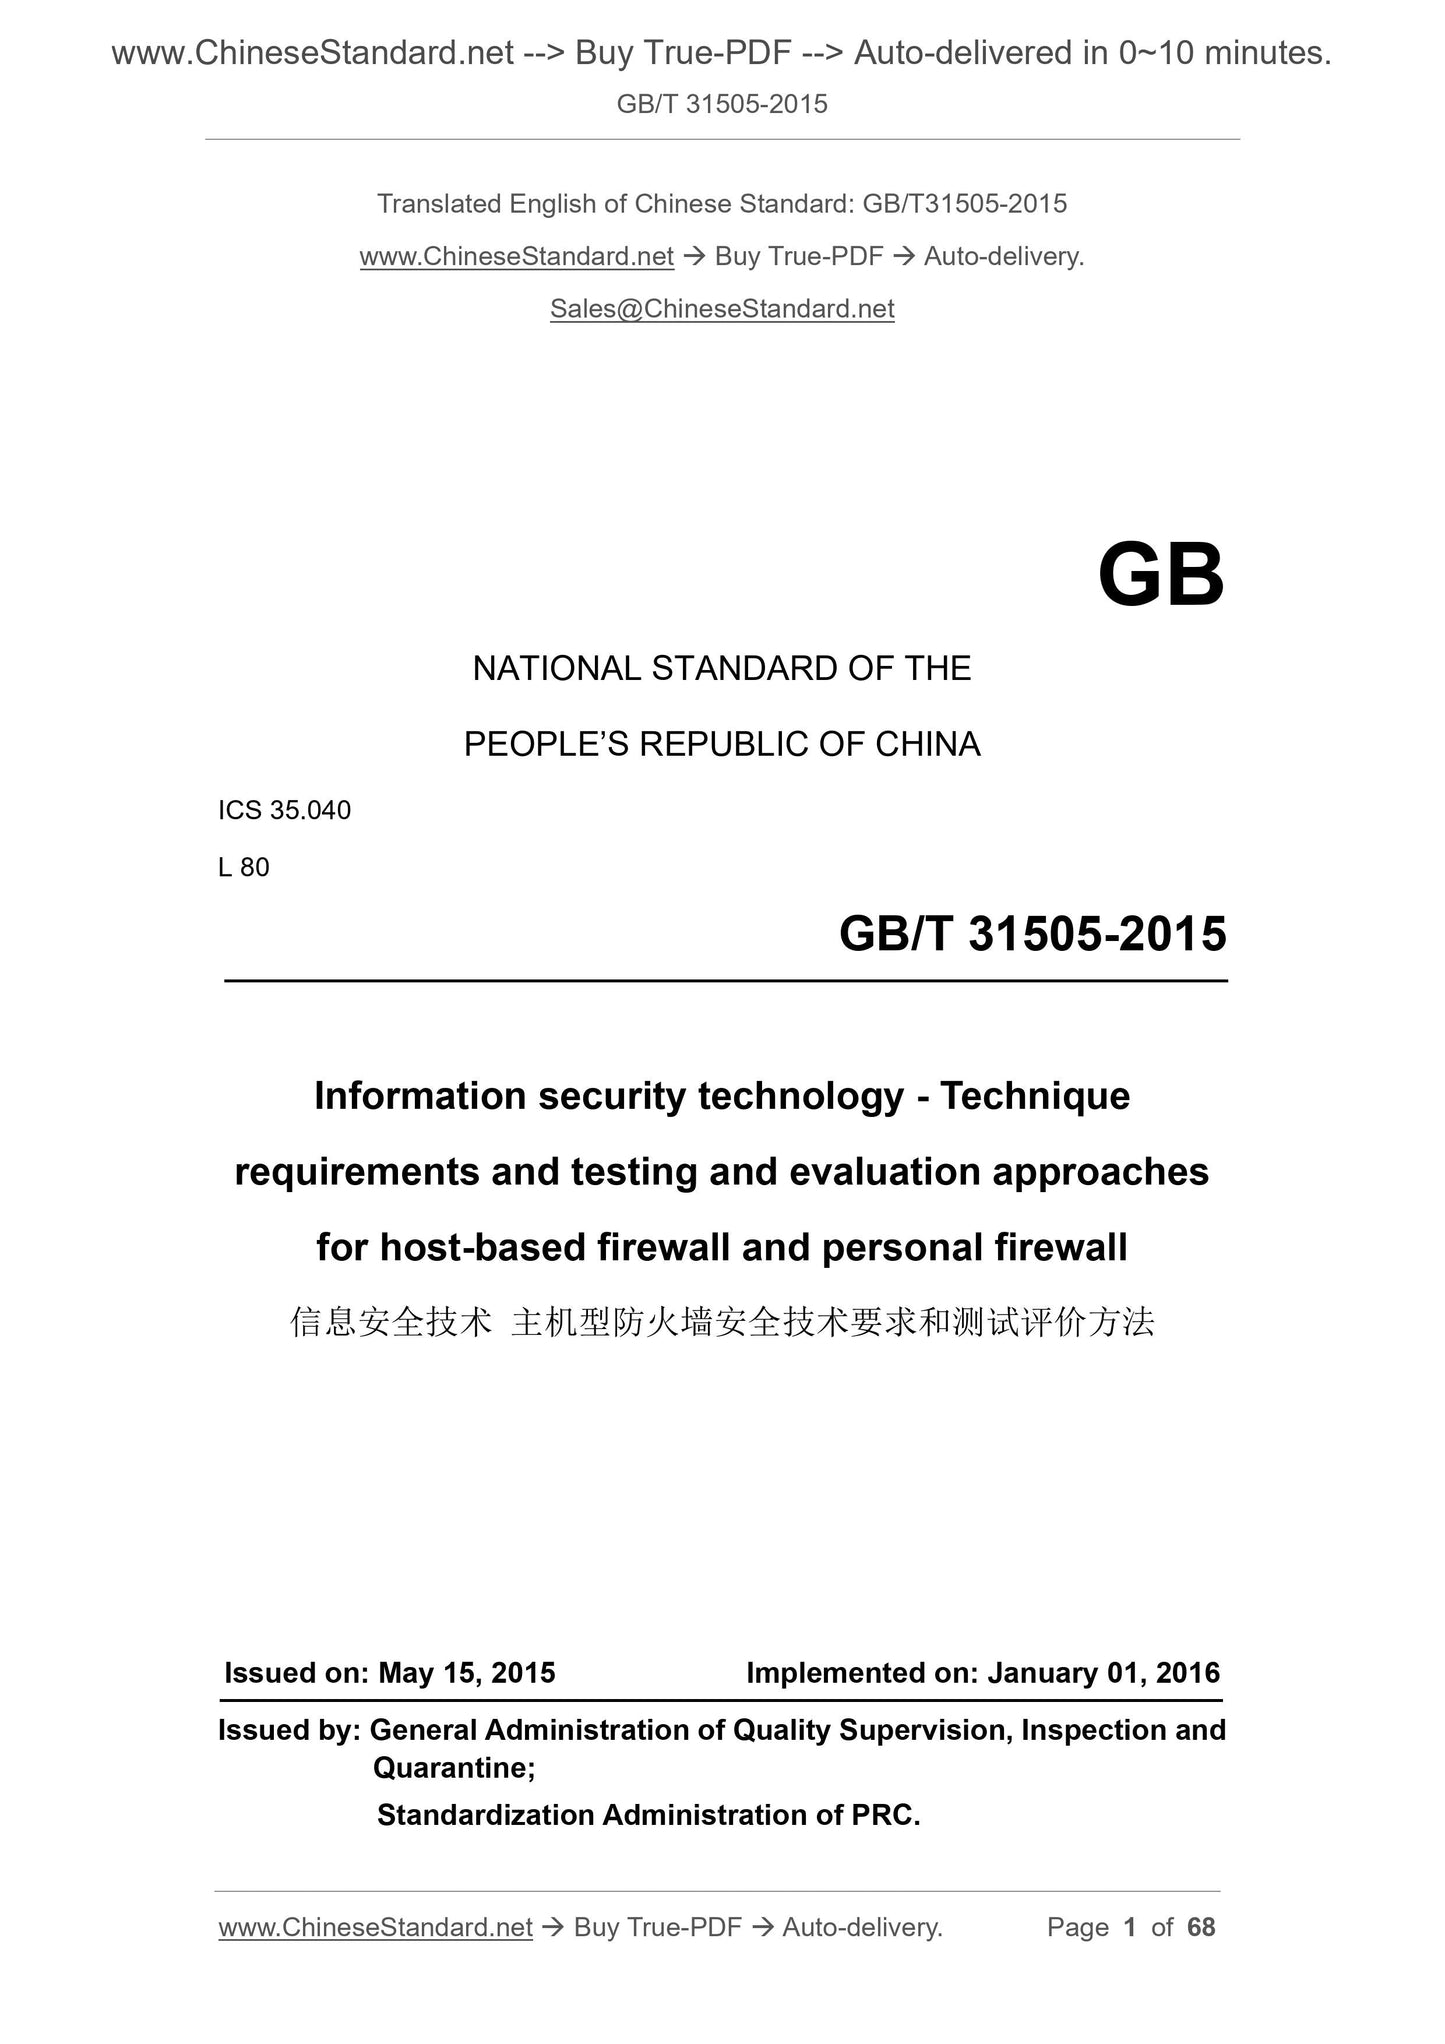 GB/T 31505-2015 Page 1